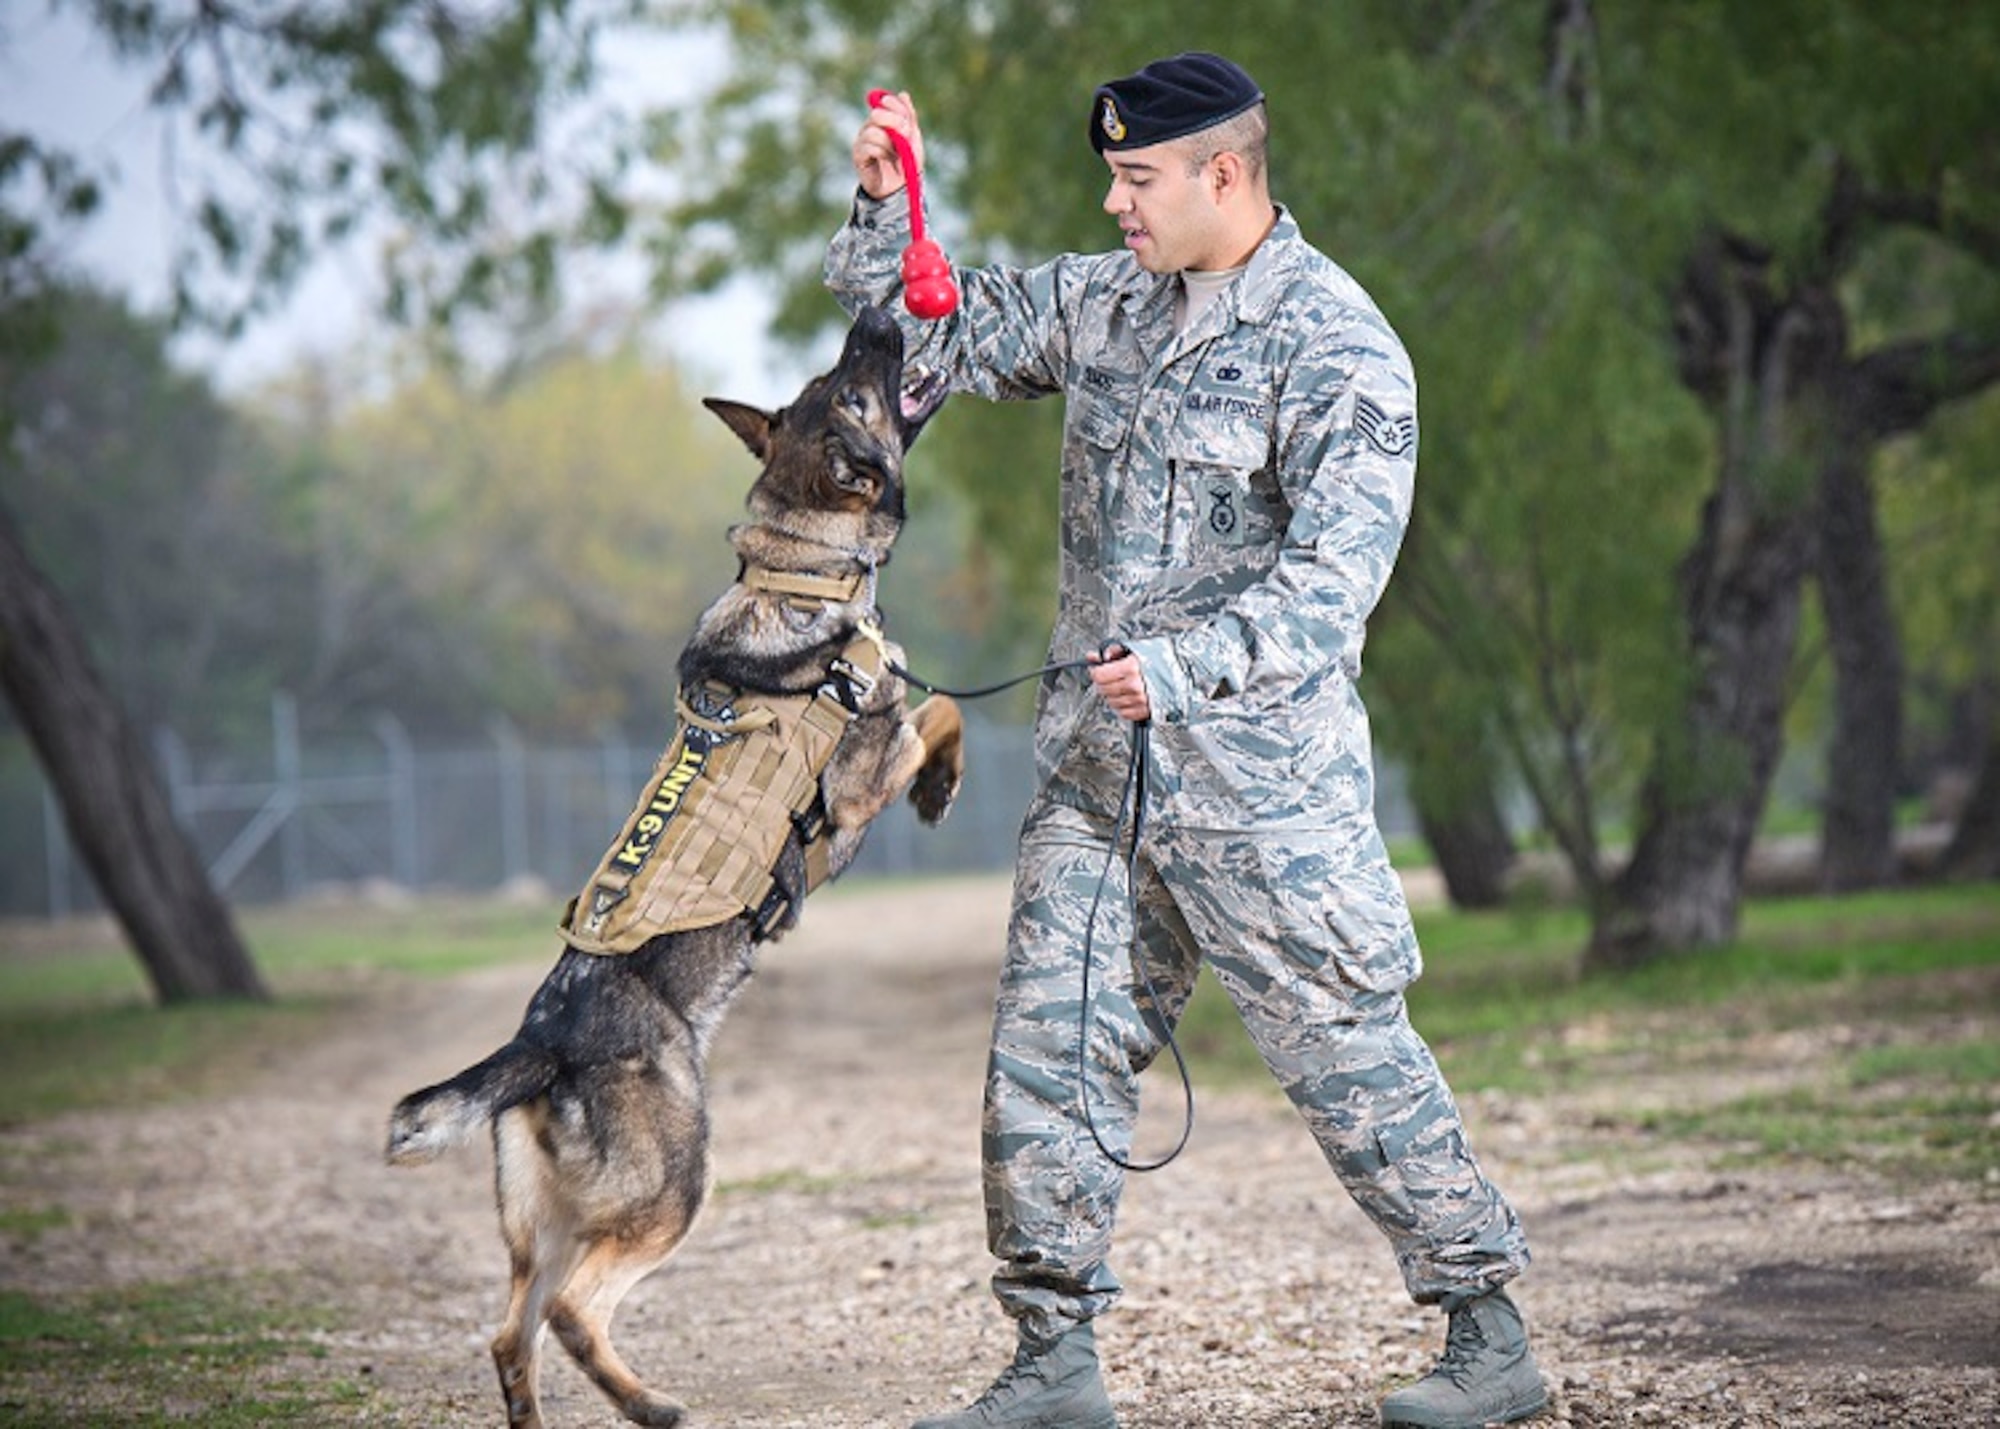 The 341st Training Squadron provides training to military working dogs (MWDs) used in patrol, drug and explosive detection, and specialized mission functions for the Department of Defense (DoD) and other government agencies. Personnel conduct operational training of MWD handlers and supervisors and sustain DoD MWD program through logistical support, veterinary care, and research and development for security efforts worldwide.